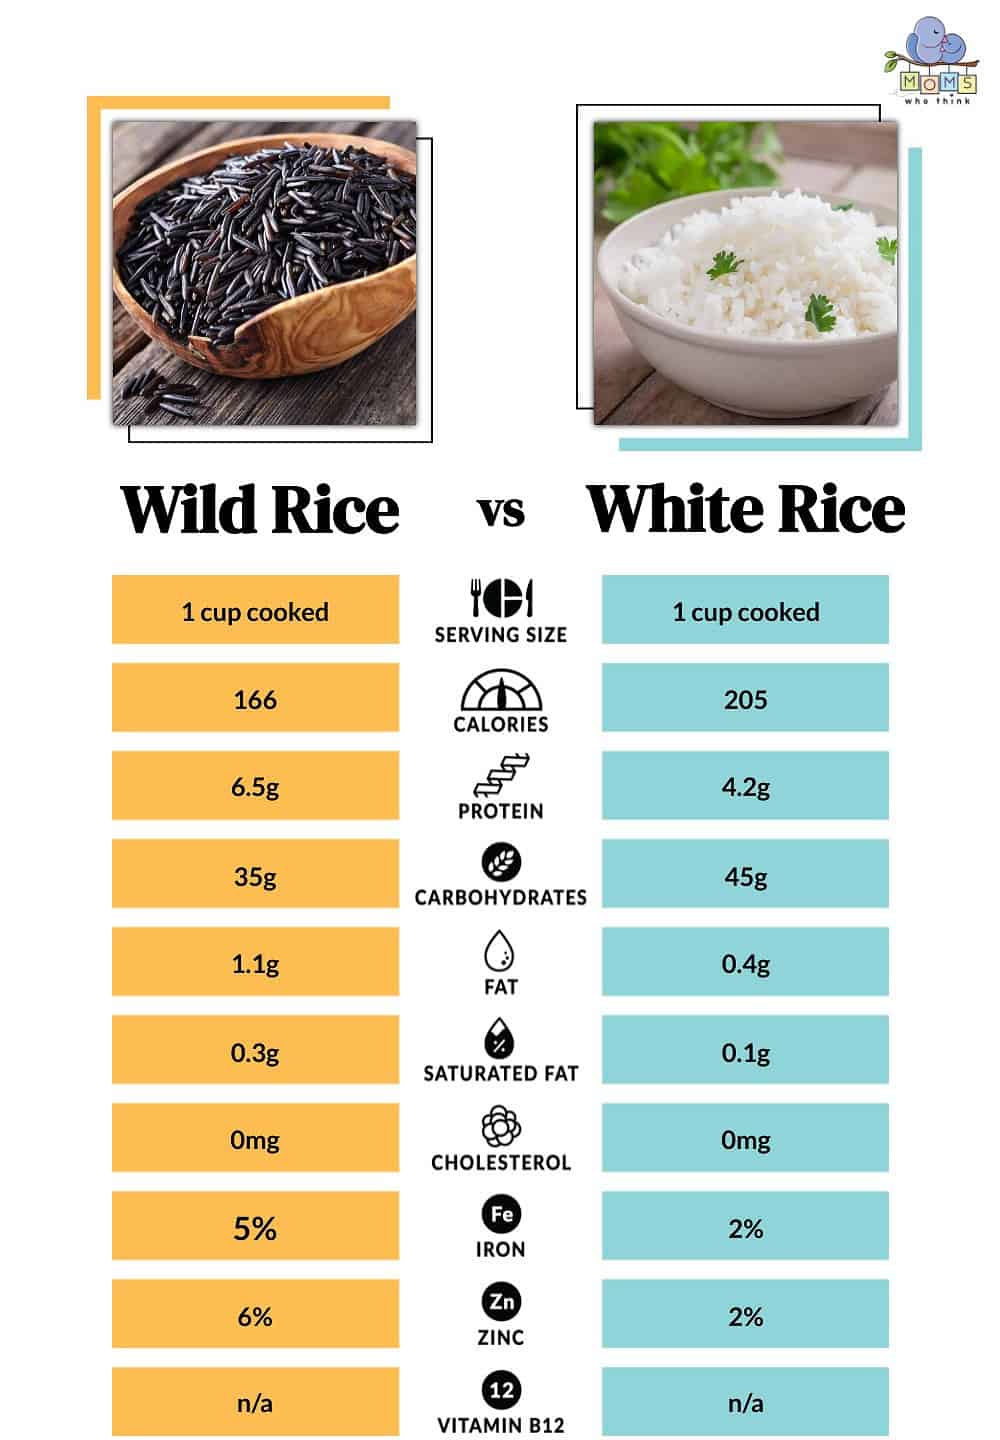 Wild Rice vs White Rice Nutritional Facts